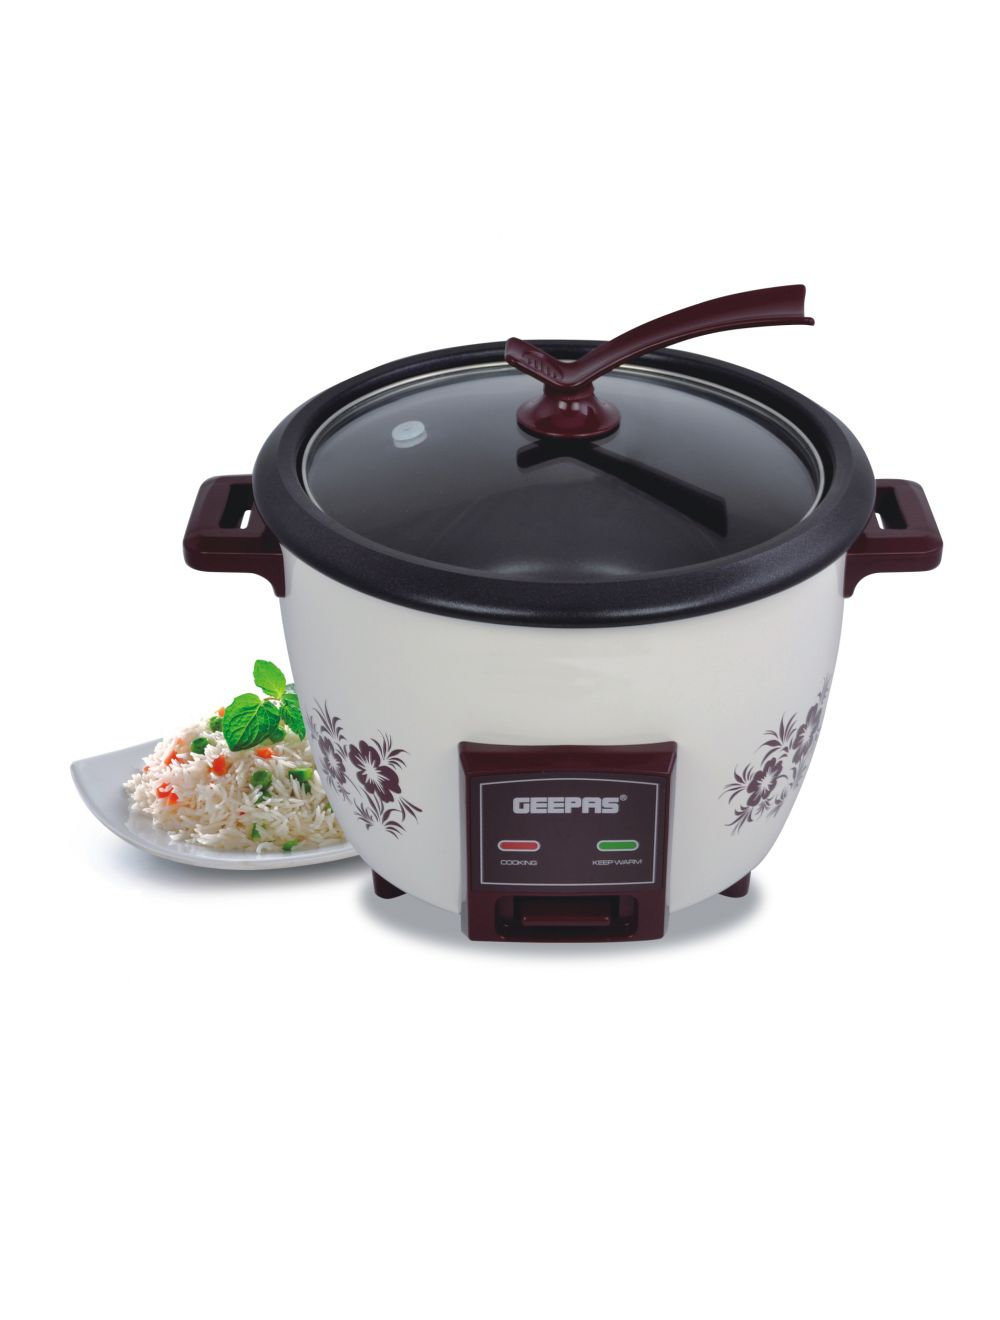 Geepas GRC4332 1.5 Litre Automatic Rice Cooker